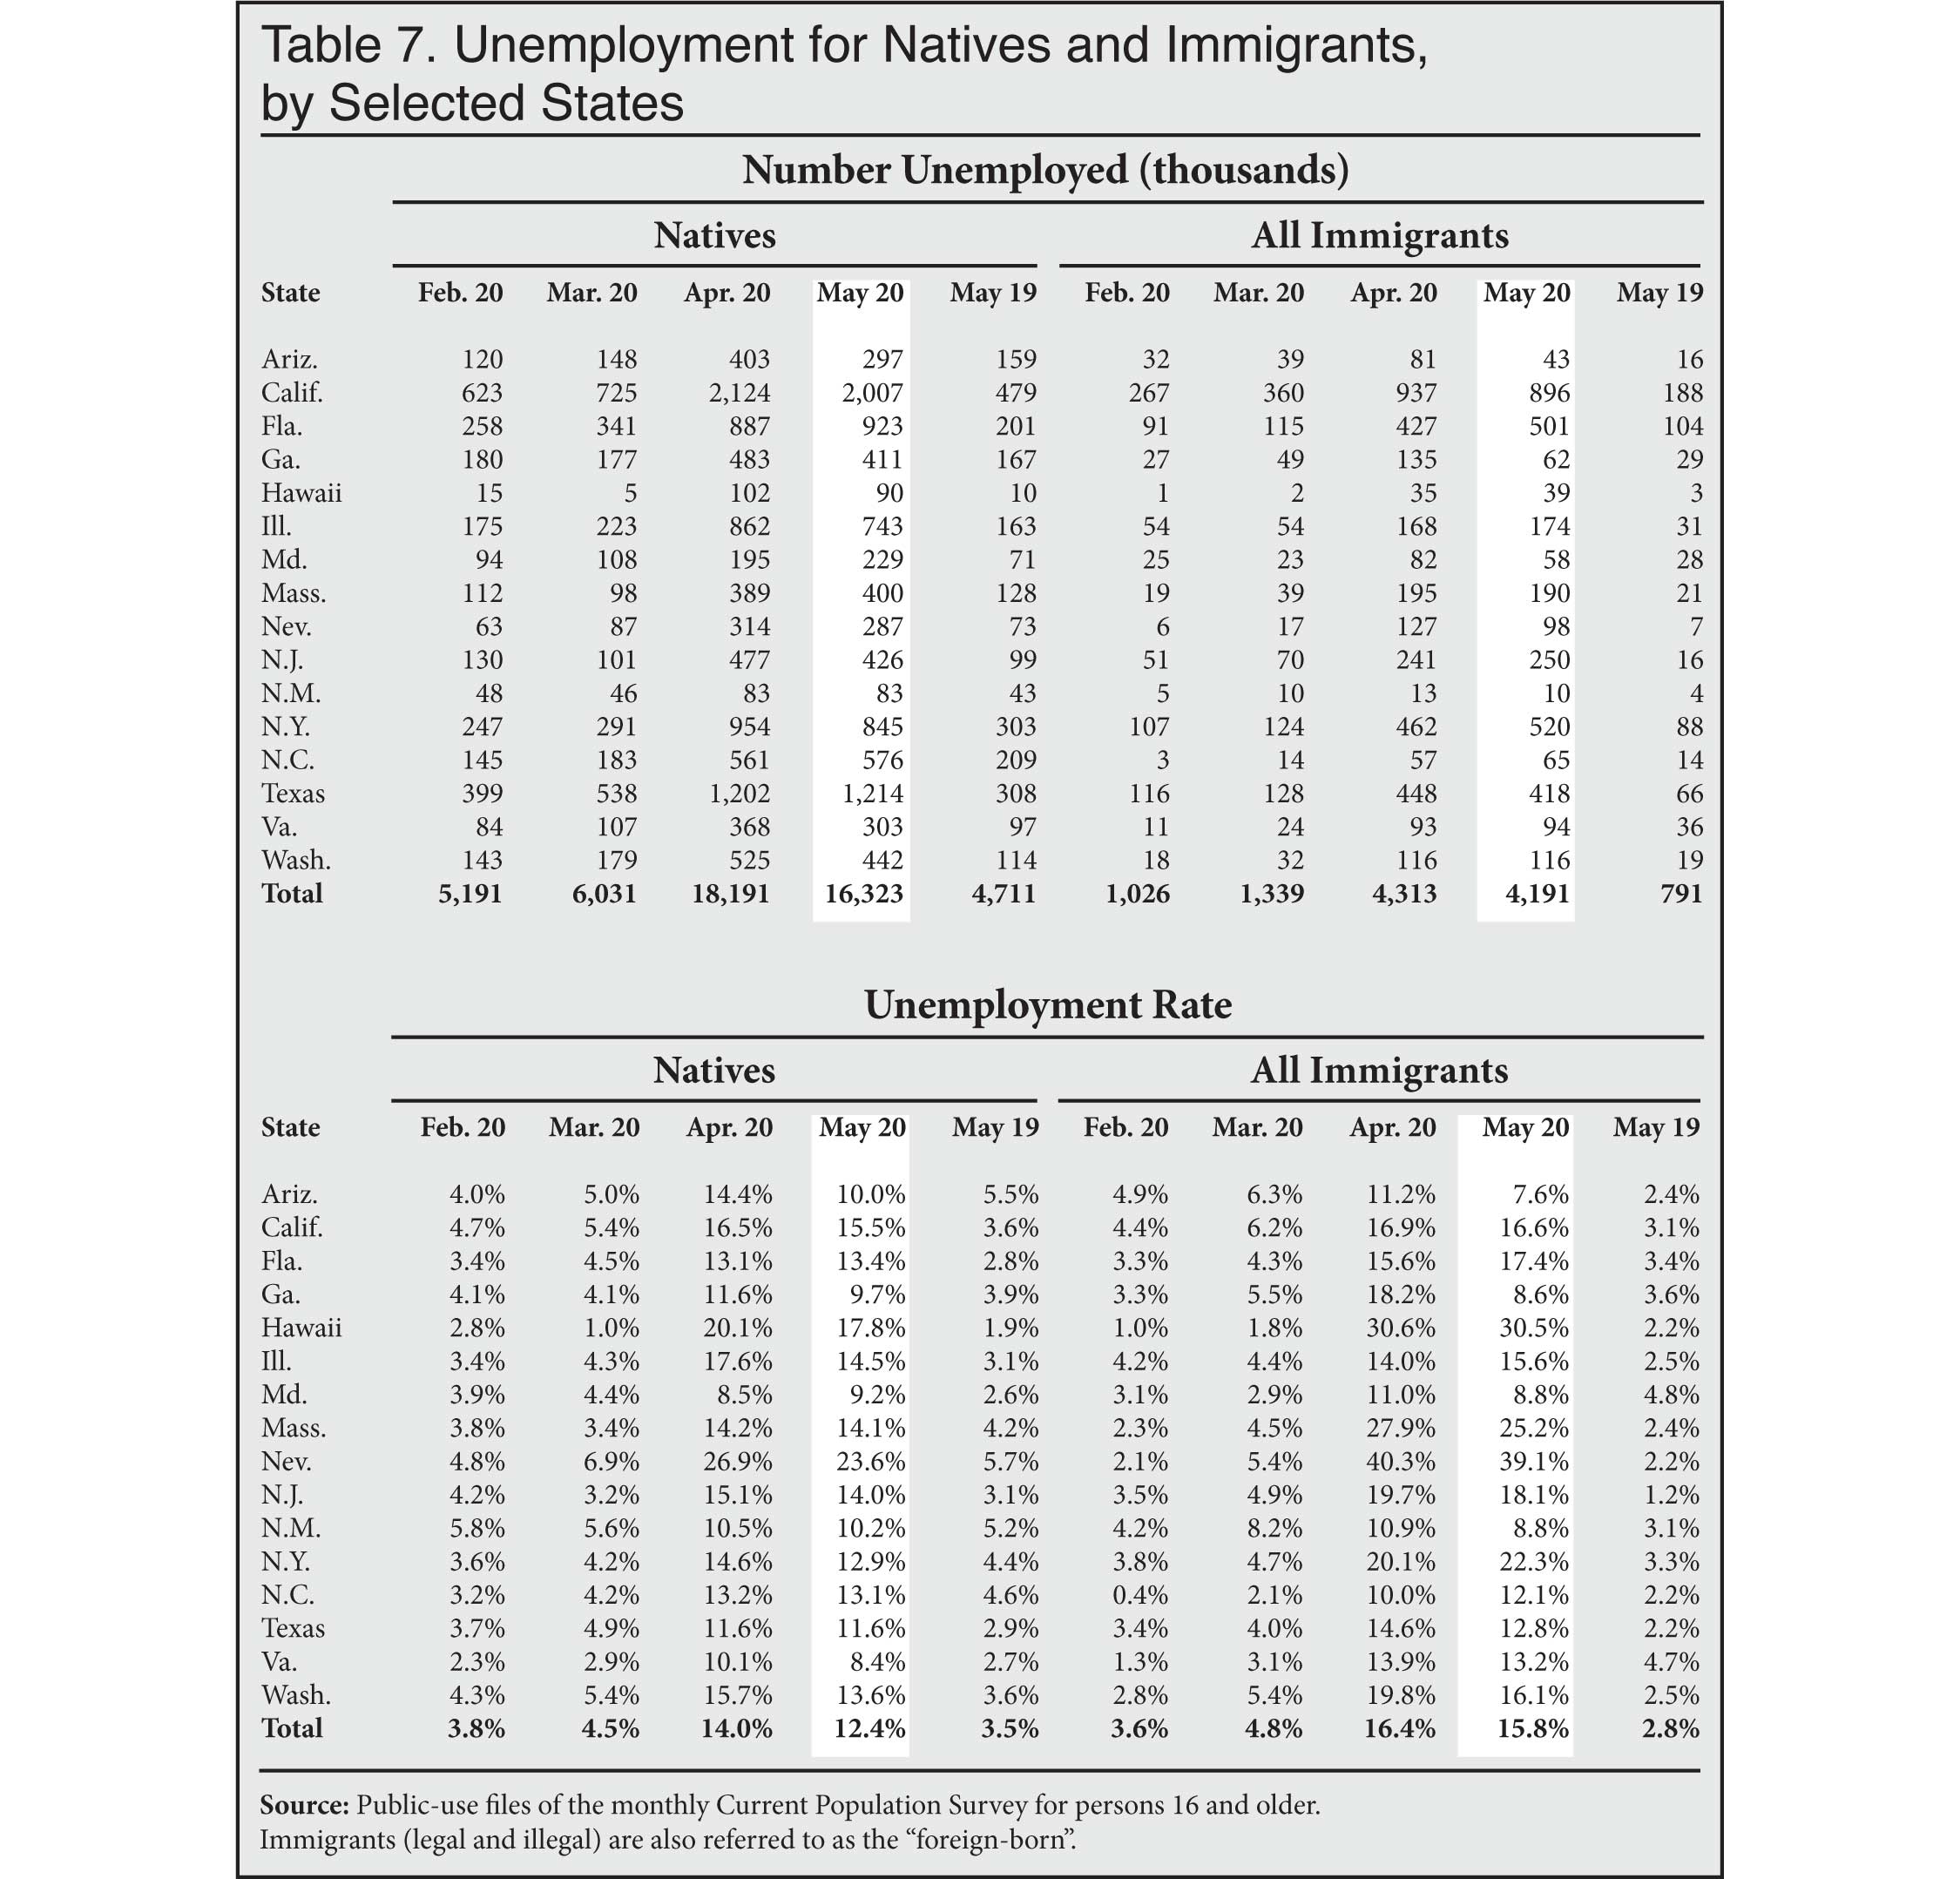 Table: Unemployment for Natives and Immigrants, by Select States